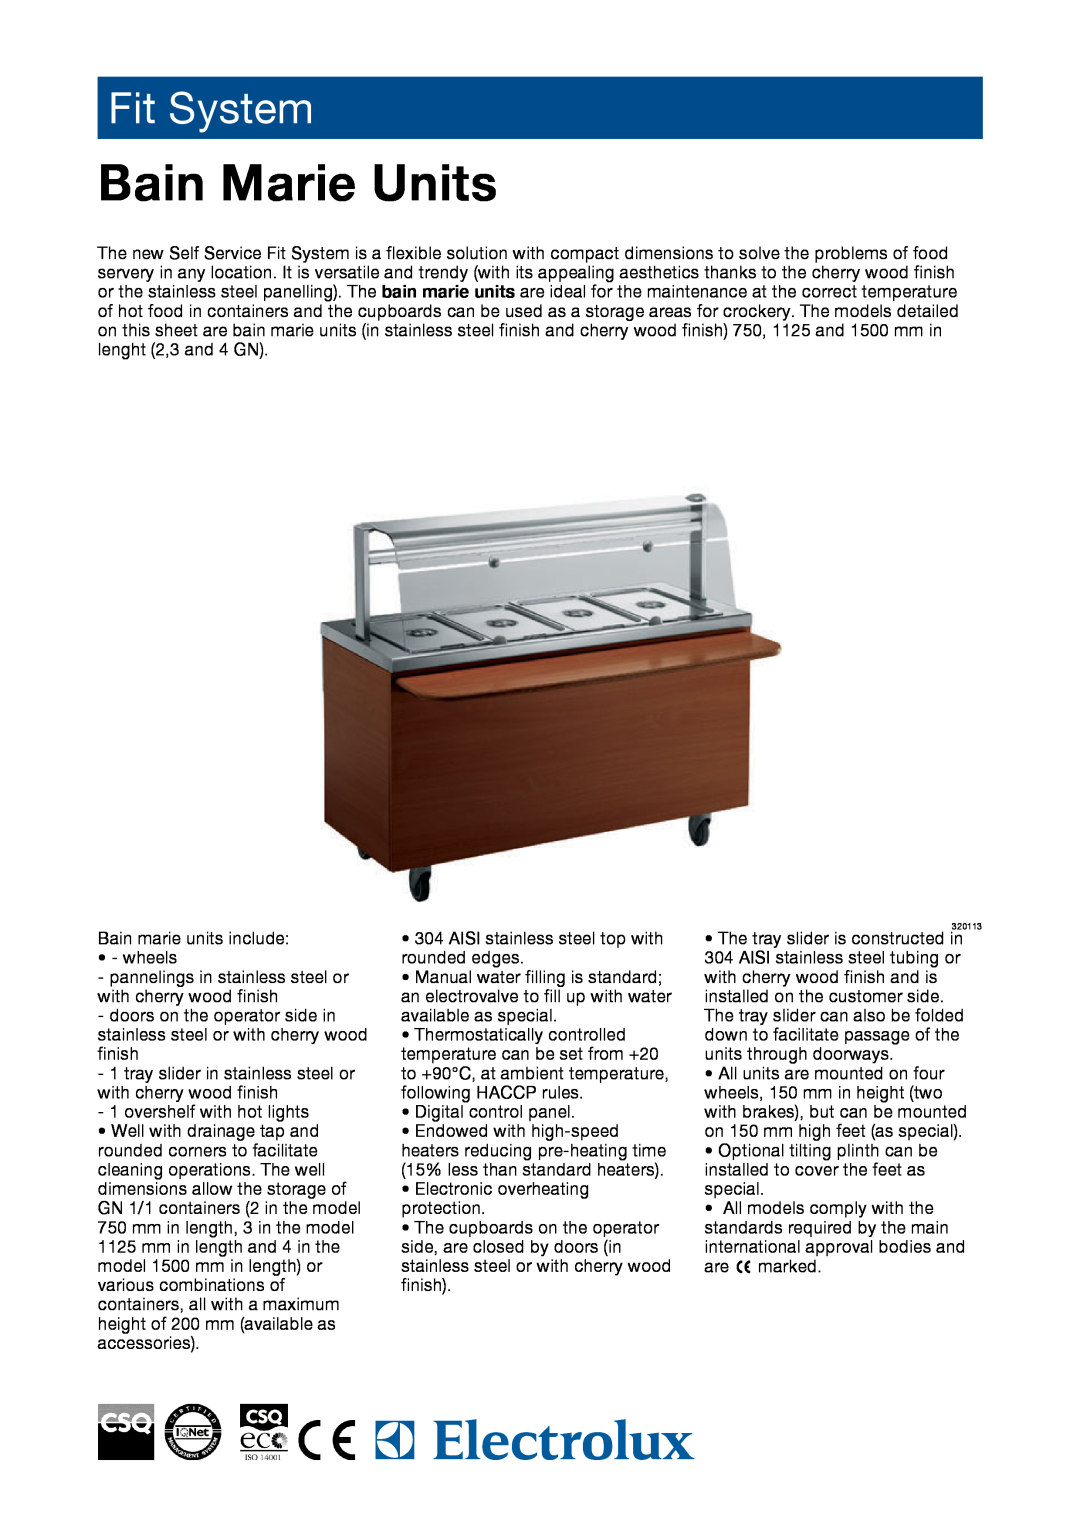 Electrolux Bain Marie Units dimensions Fit System 